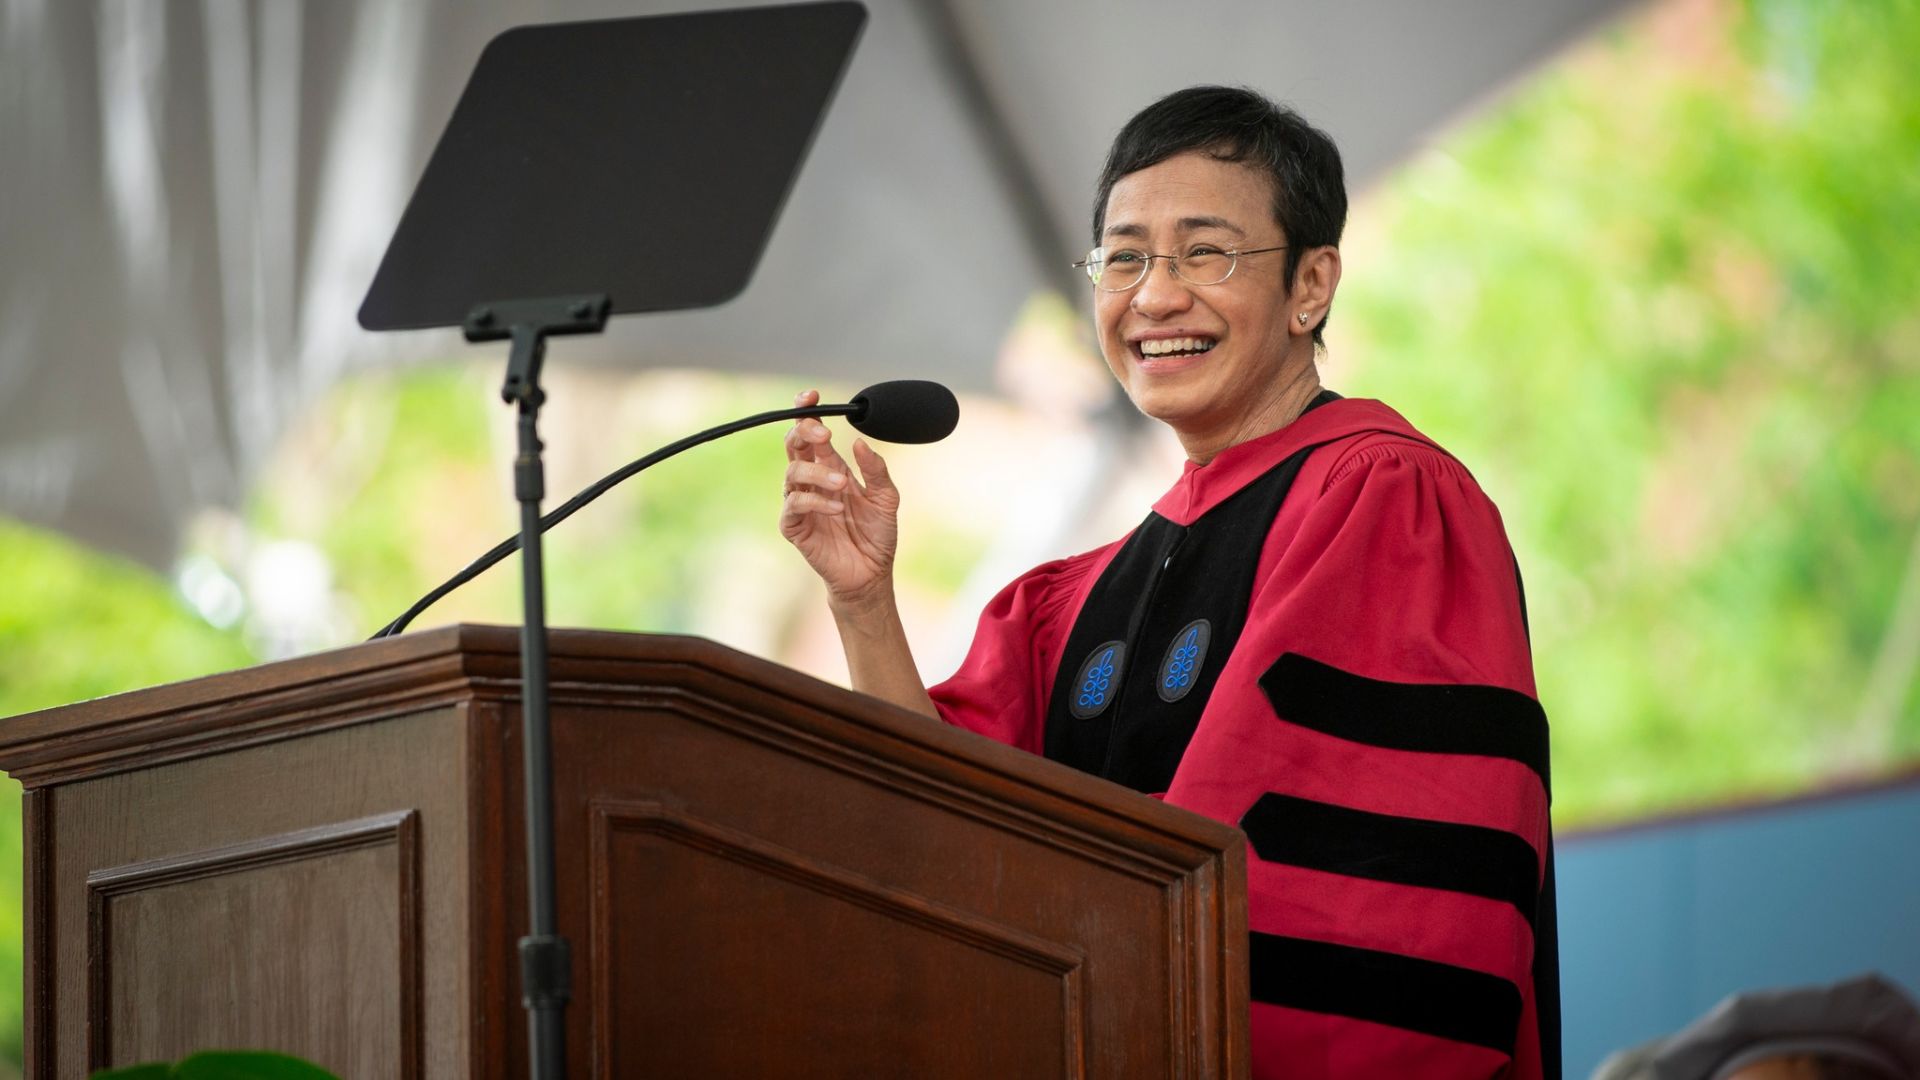 <p>During the ceremony, commencement speaker Maria Ressa <a href="https://www.nbcnews.com/news/us-news/students-walk-harvard-college-graduation-ucla-contends-new-protest-rcna153822">spoke</a> to the graduates about the importance of being tested and fighting for what they believe in.     </p> <p>She emphasized that such challenges define one's character. </p>